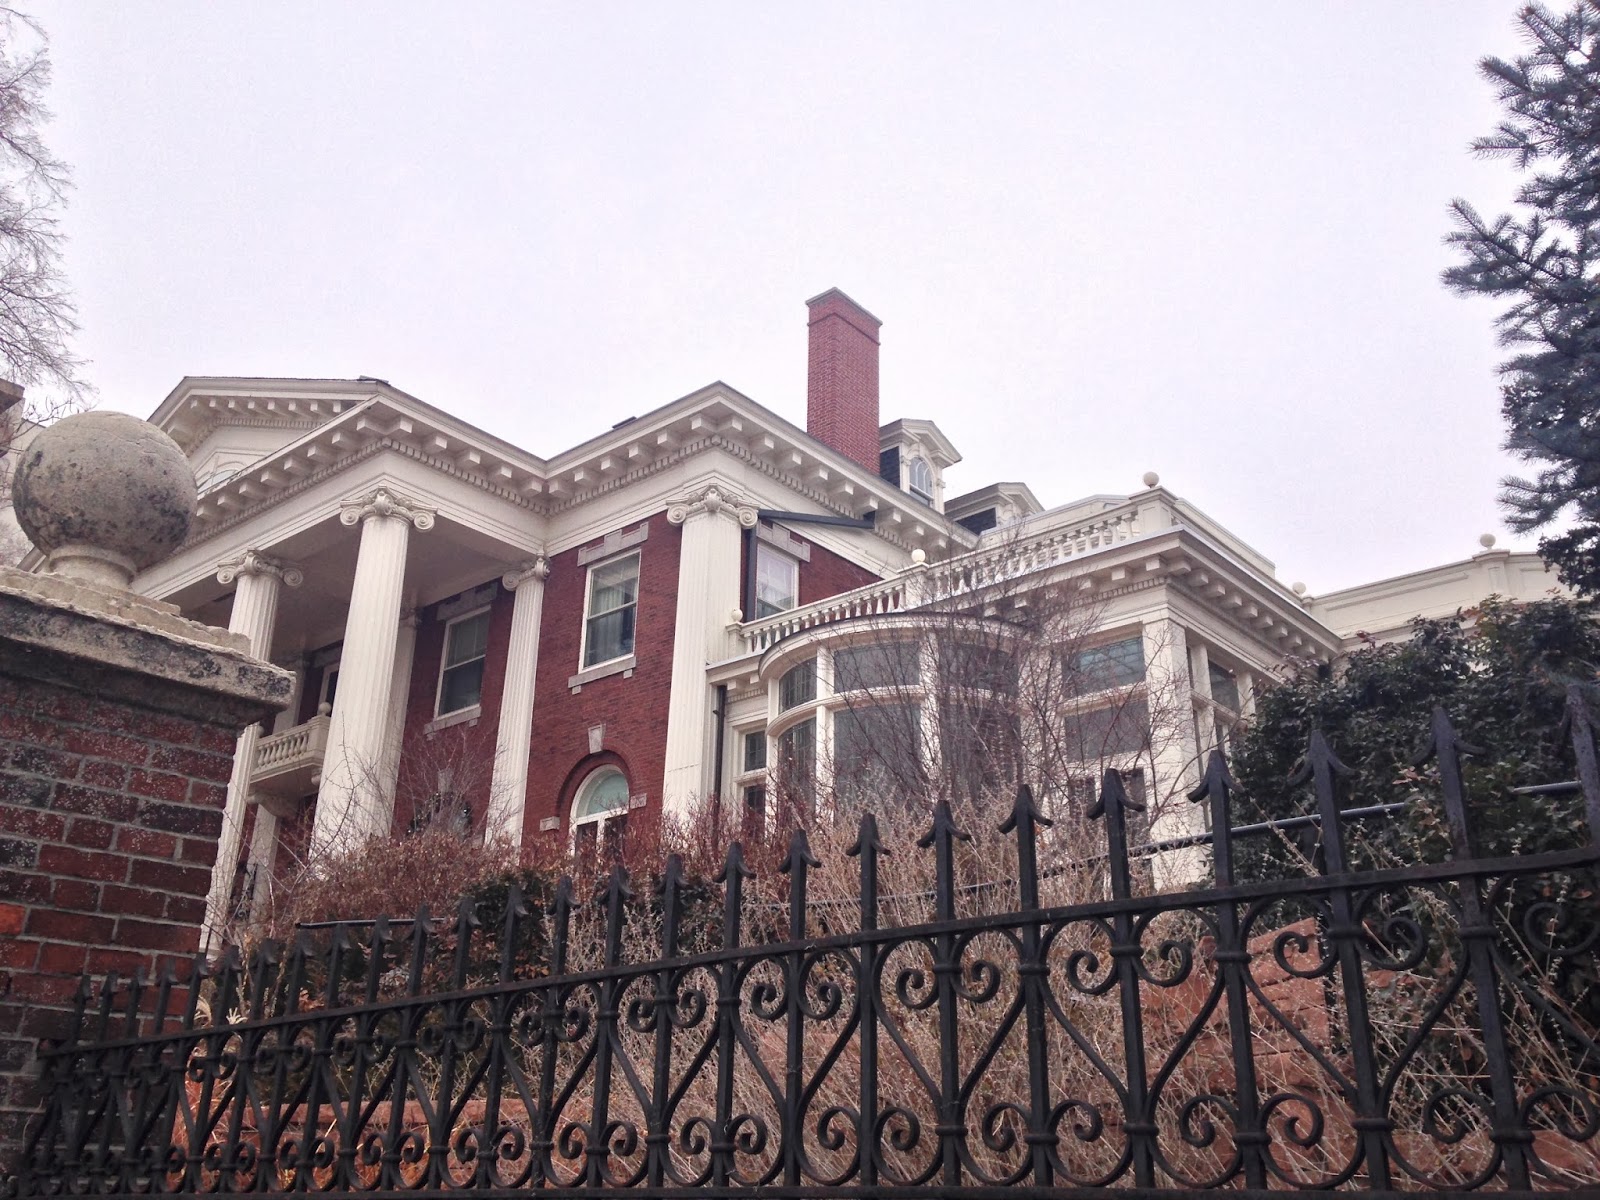 Governor's Residence at the Boettcher Mansion